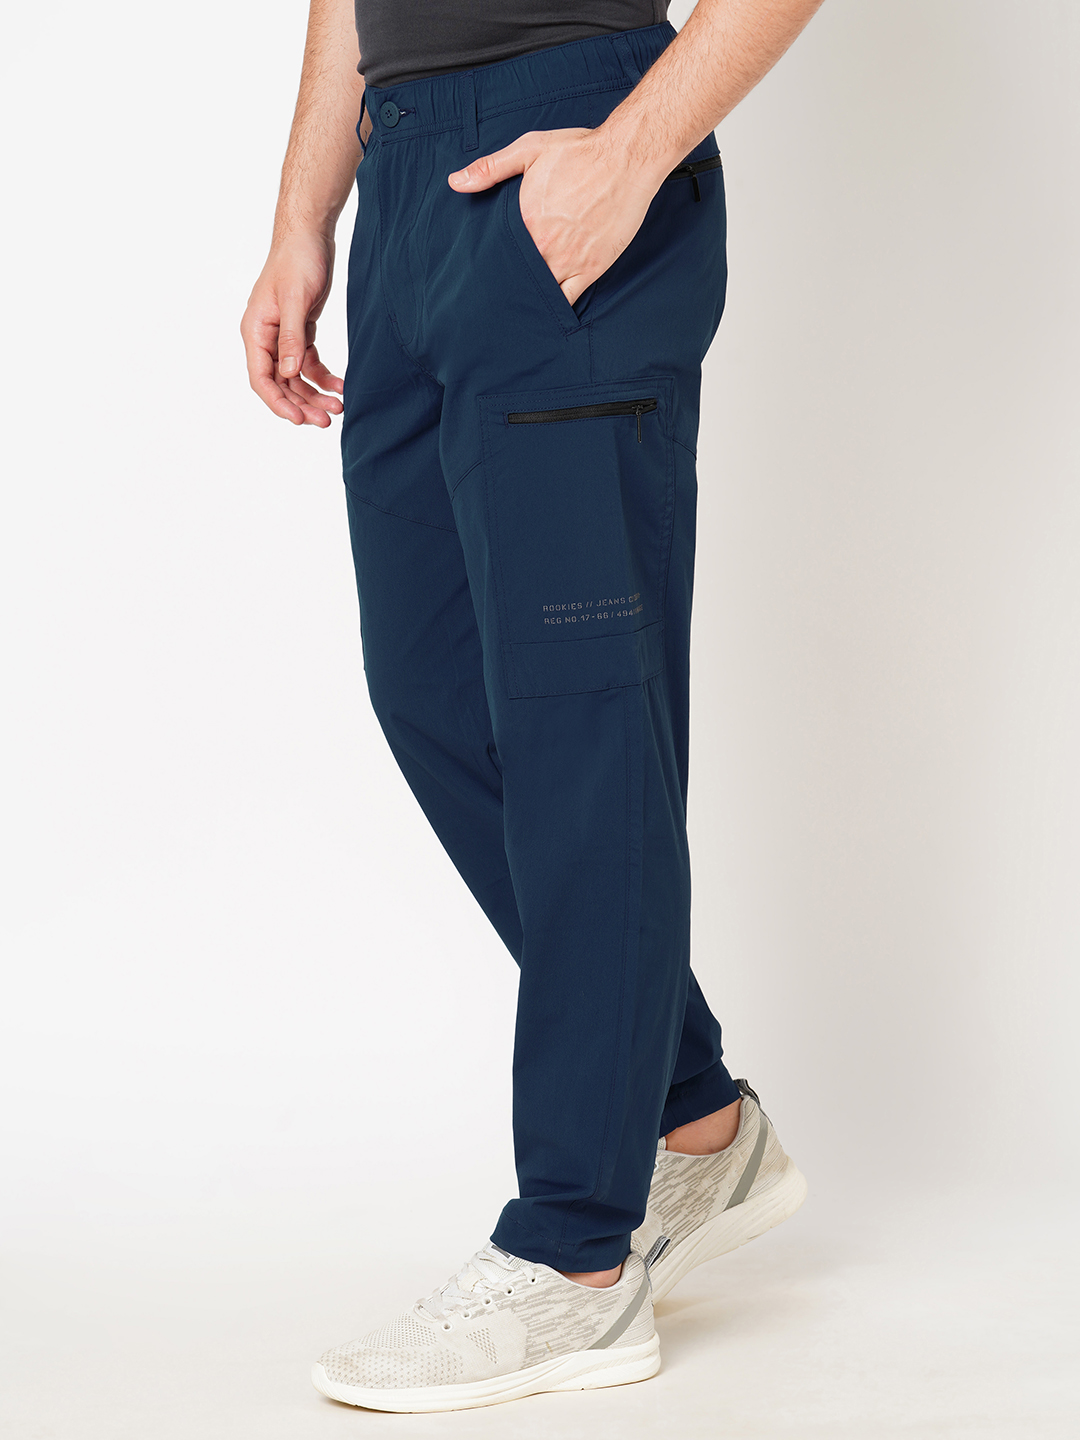 PAGEANT BLUE UTILITY PANT (SLIM TAPERED FIT)